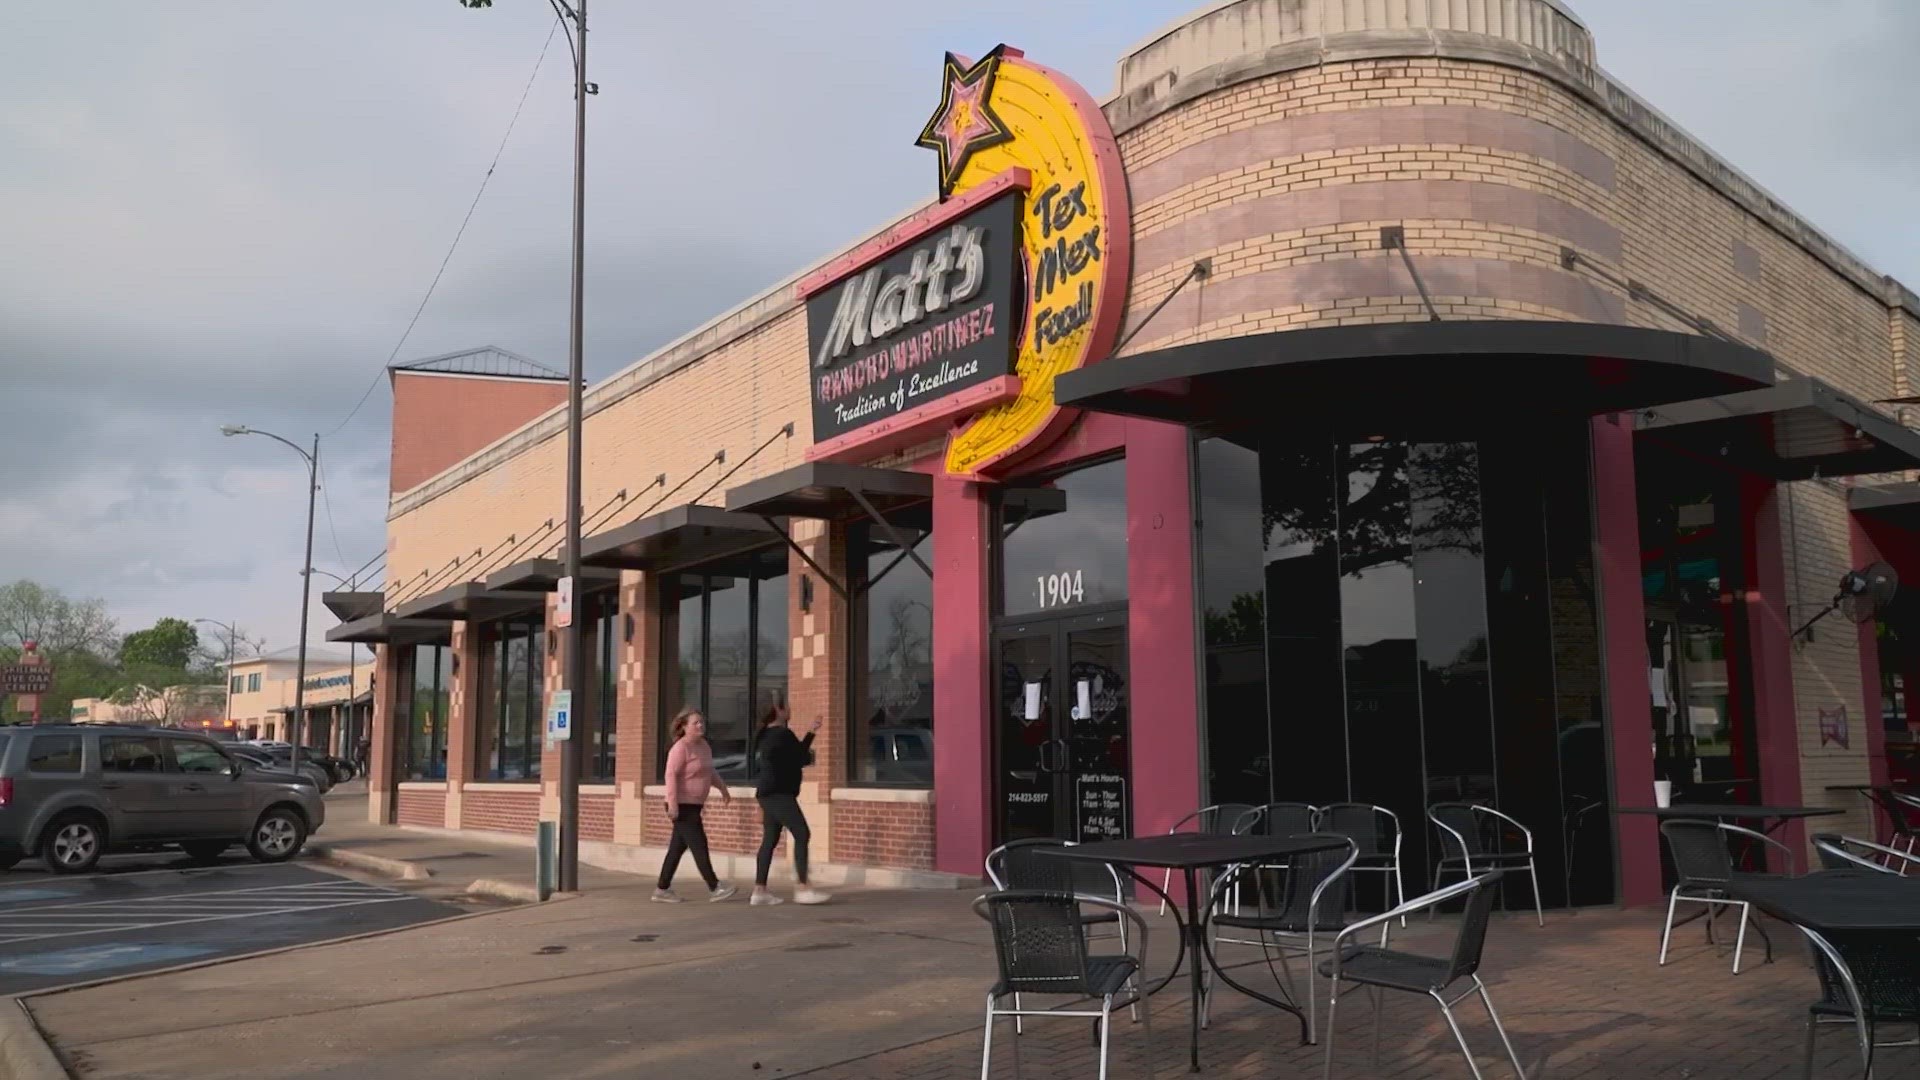 The owners say their location in Allen, Texas, will remain open.